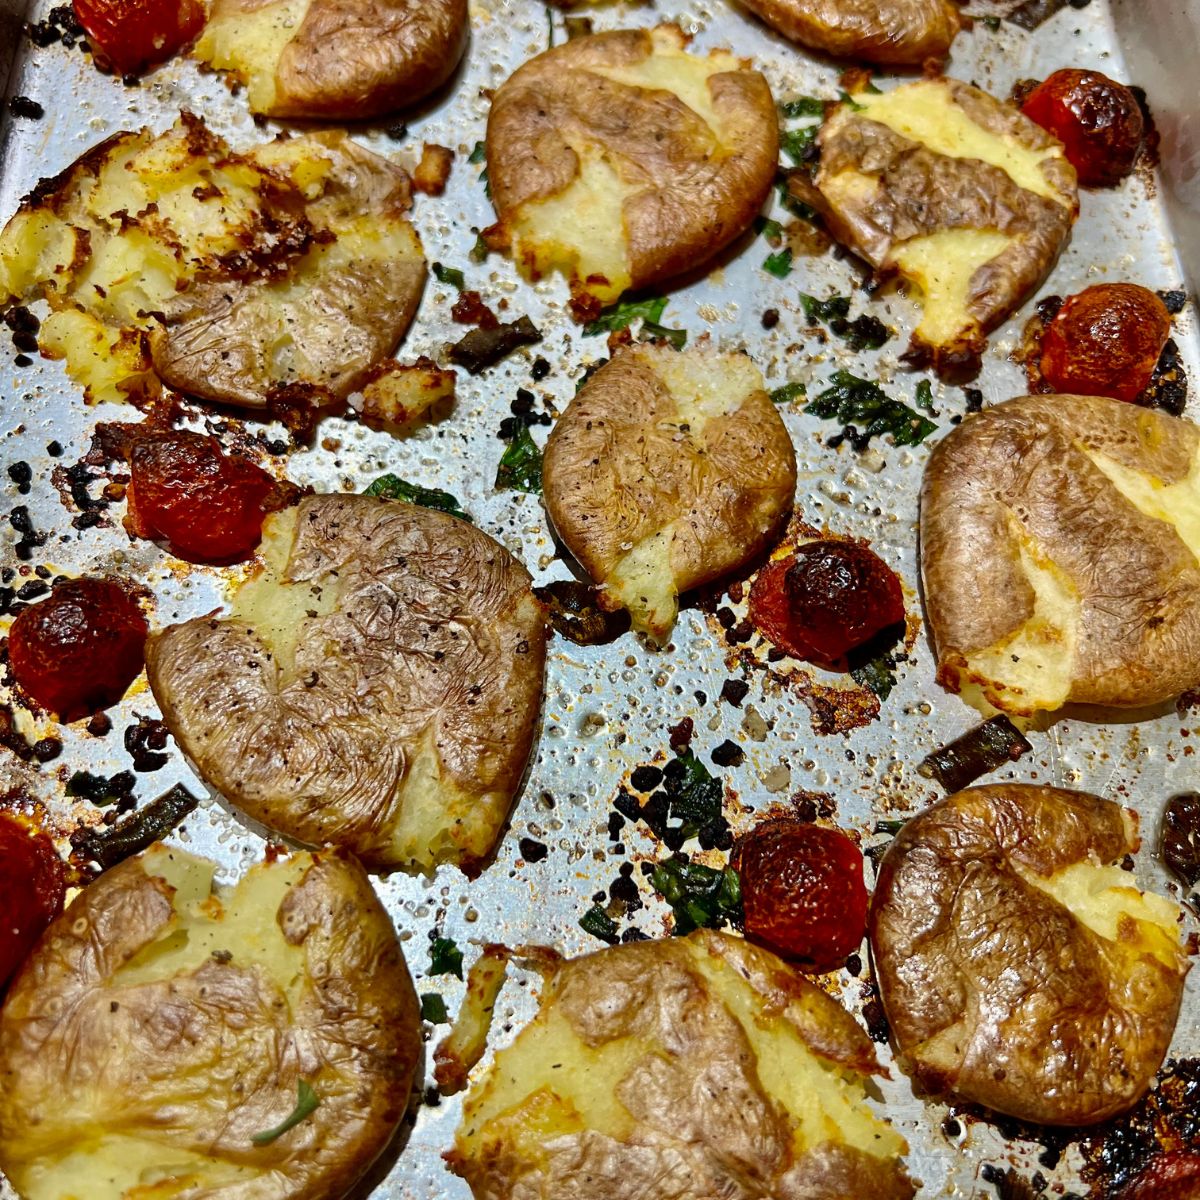 Air fryer smashed potatoes on a baking sheet pan with cherry tomatoes and herbs